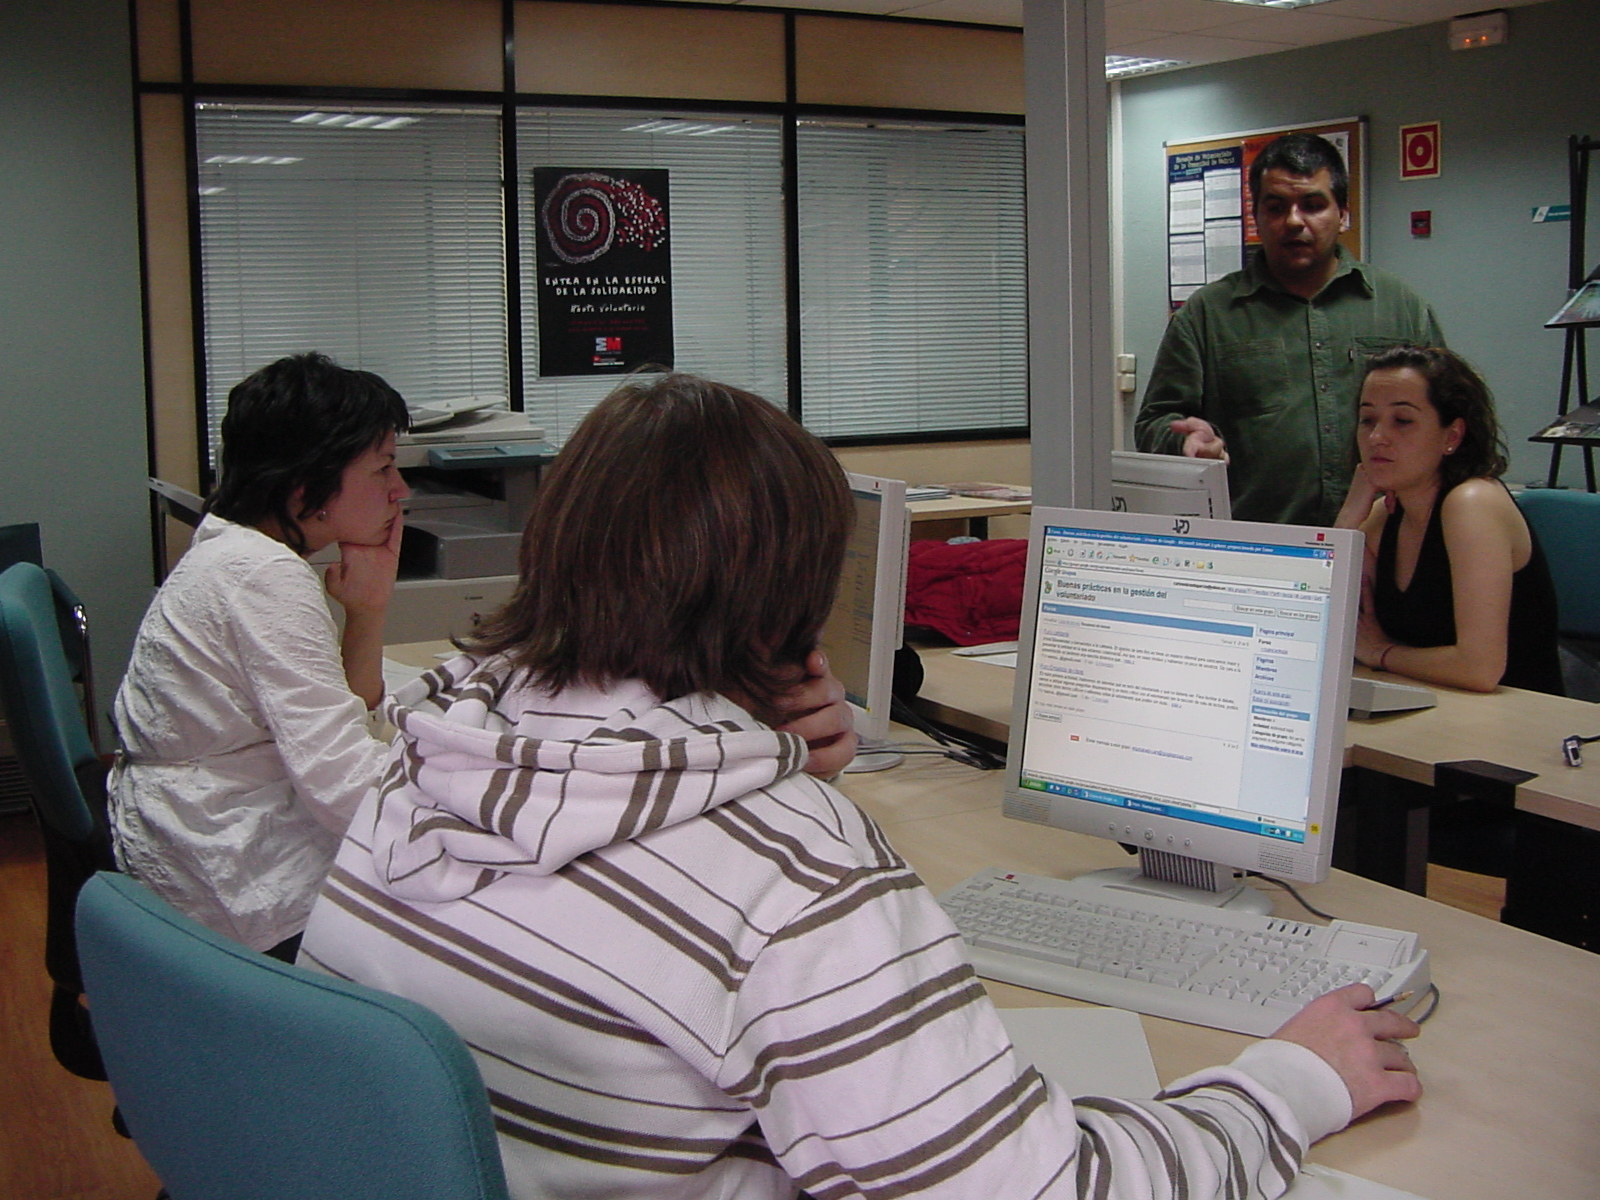 two women and one man sitting at a table looking at a computer screen